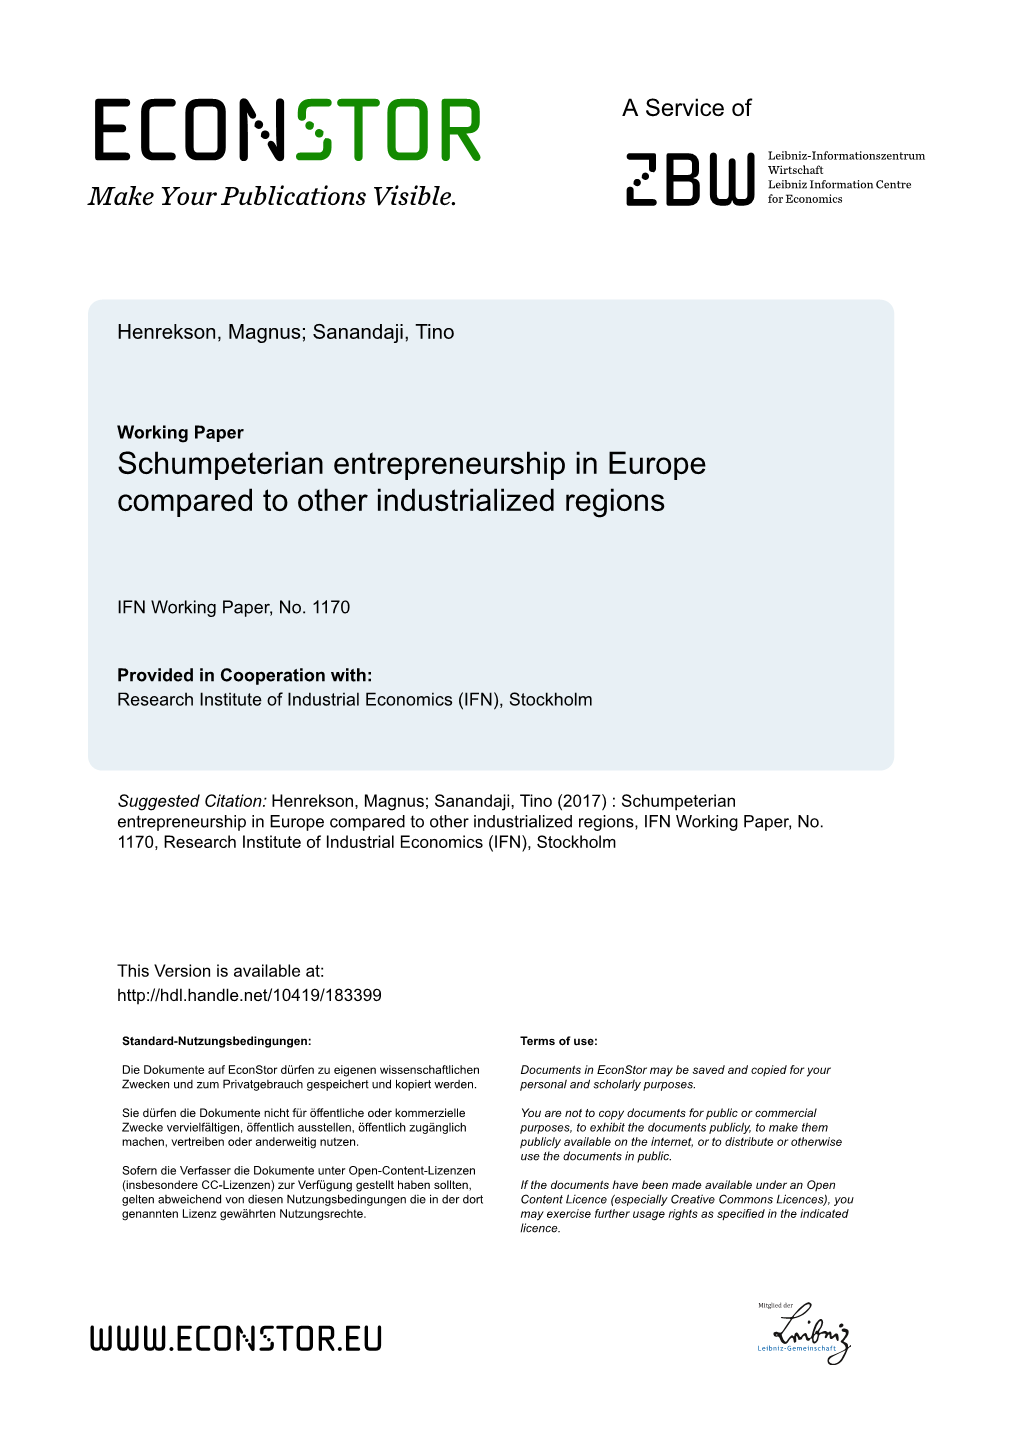 Schumpeterian Entrepreneurship in Europe Compared to Other Industrialized Regions